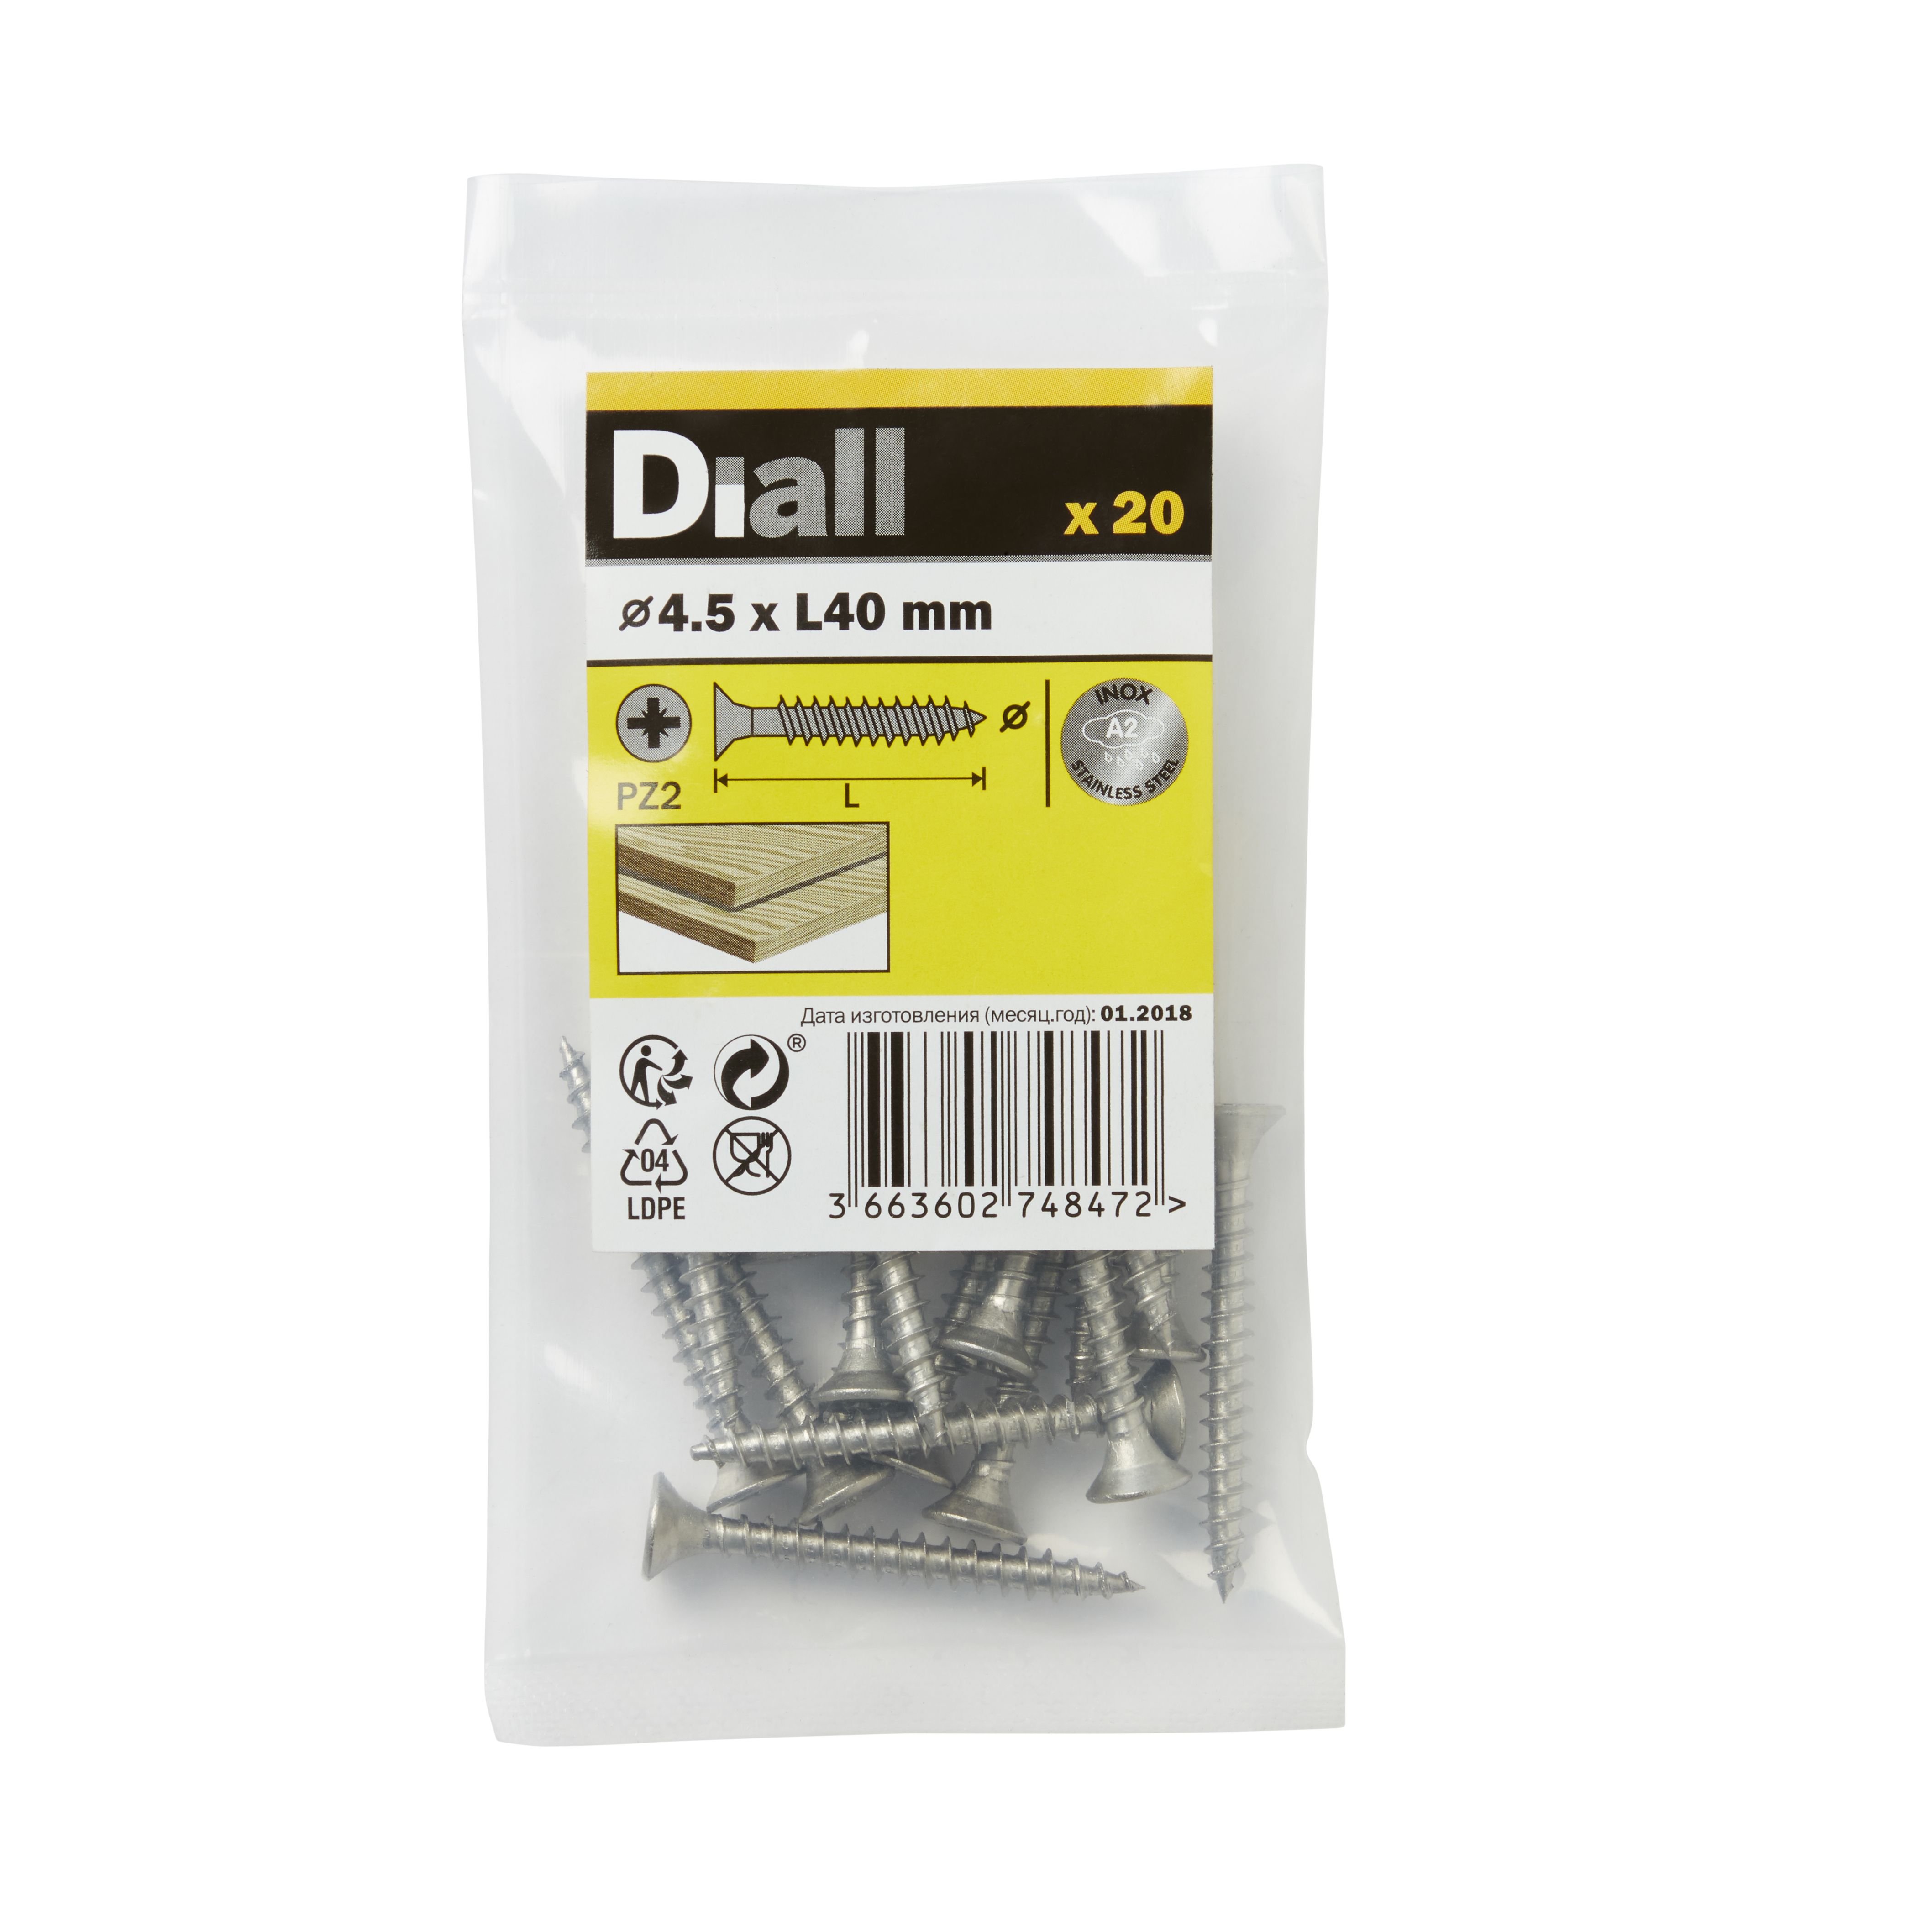 Diall Pozidriv Stainless steel Screw (Dia)4.5mm (L)40mm, Pack of 20